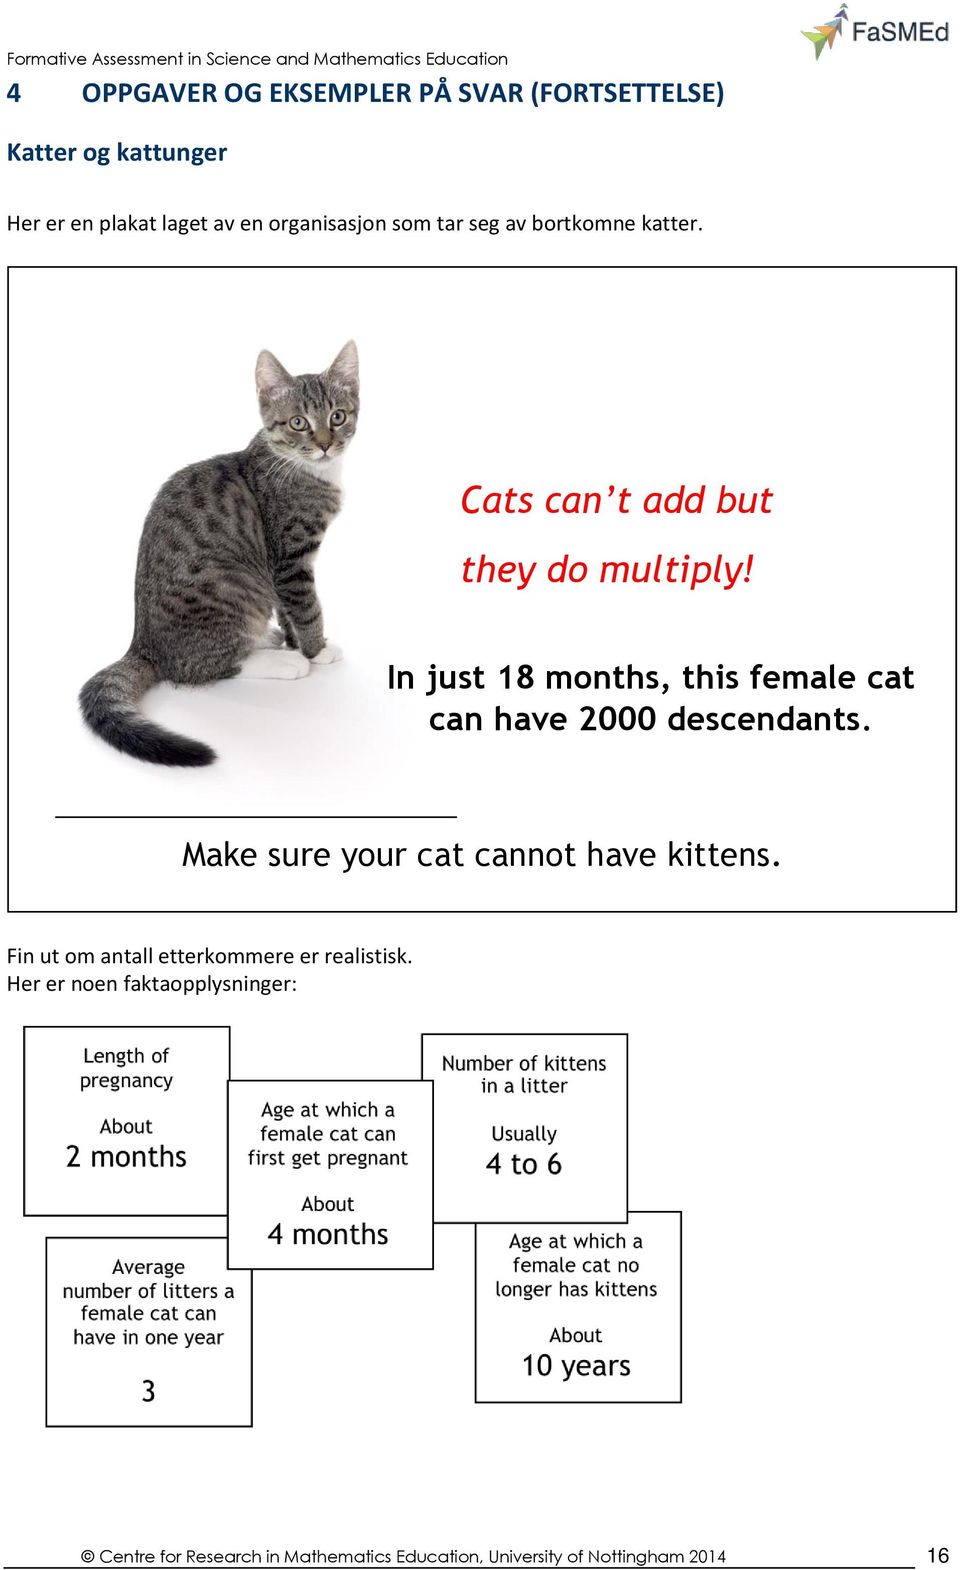 In just 18 months, this female cat can have 2000 descendants. Make sure your cat cannot have kittens.